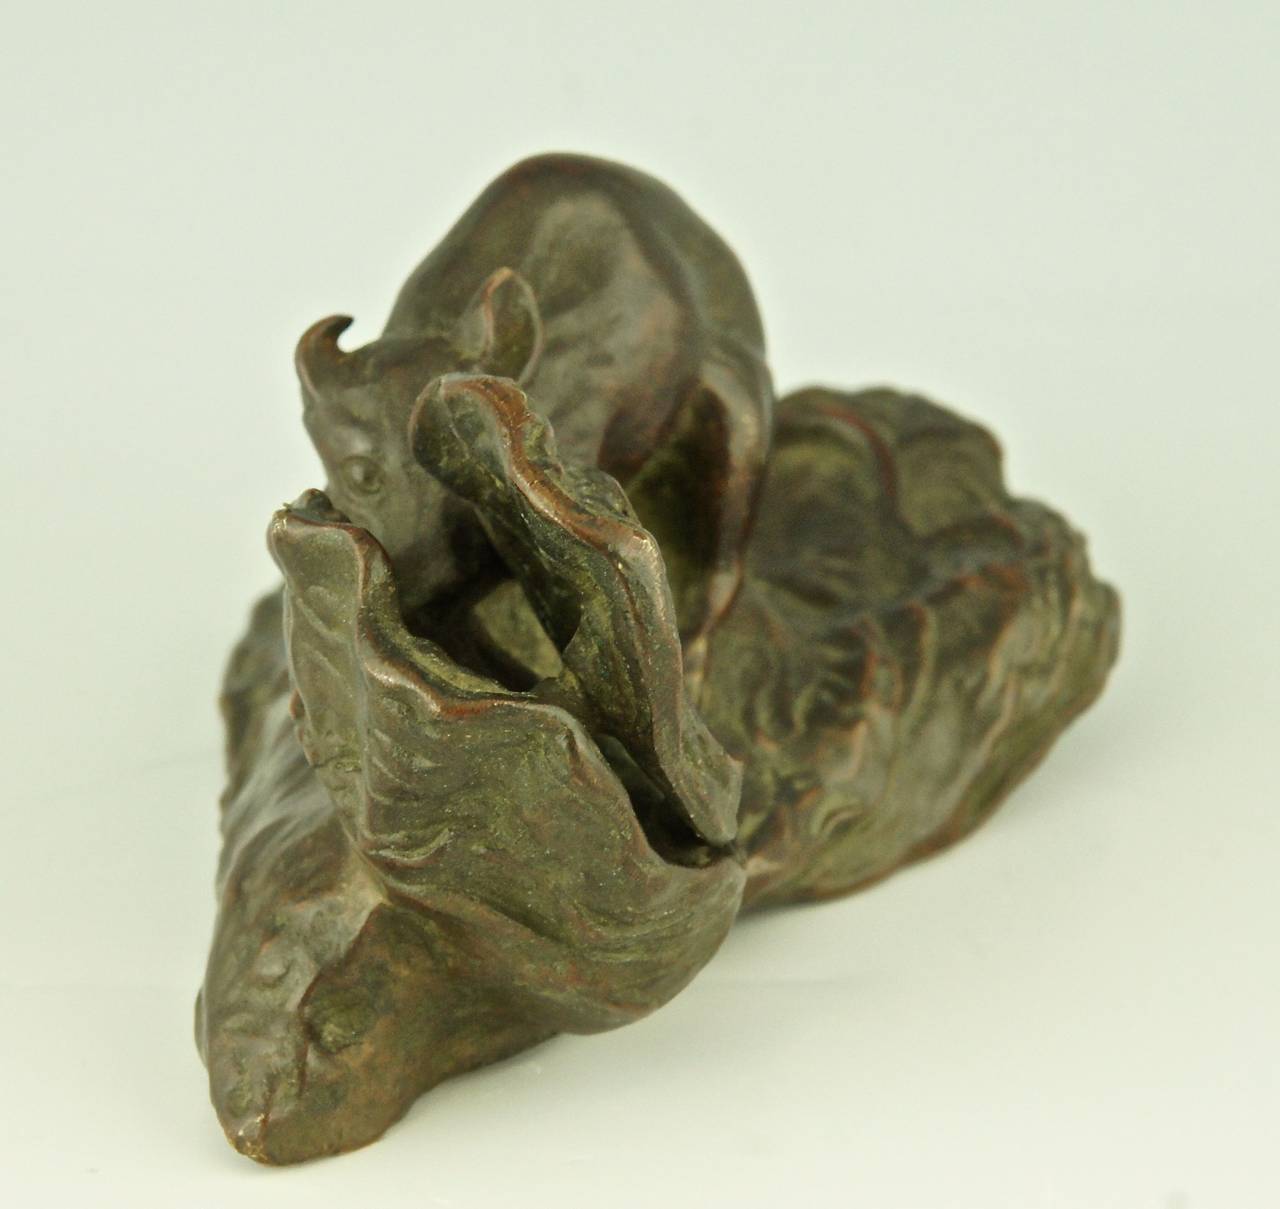 French Antique Bronze Sculpture of a Mouse with Oyster by A. Foretay, France, 1890